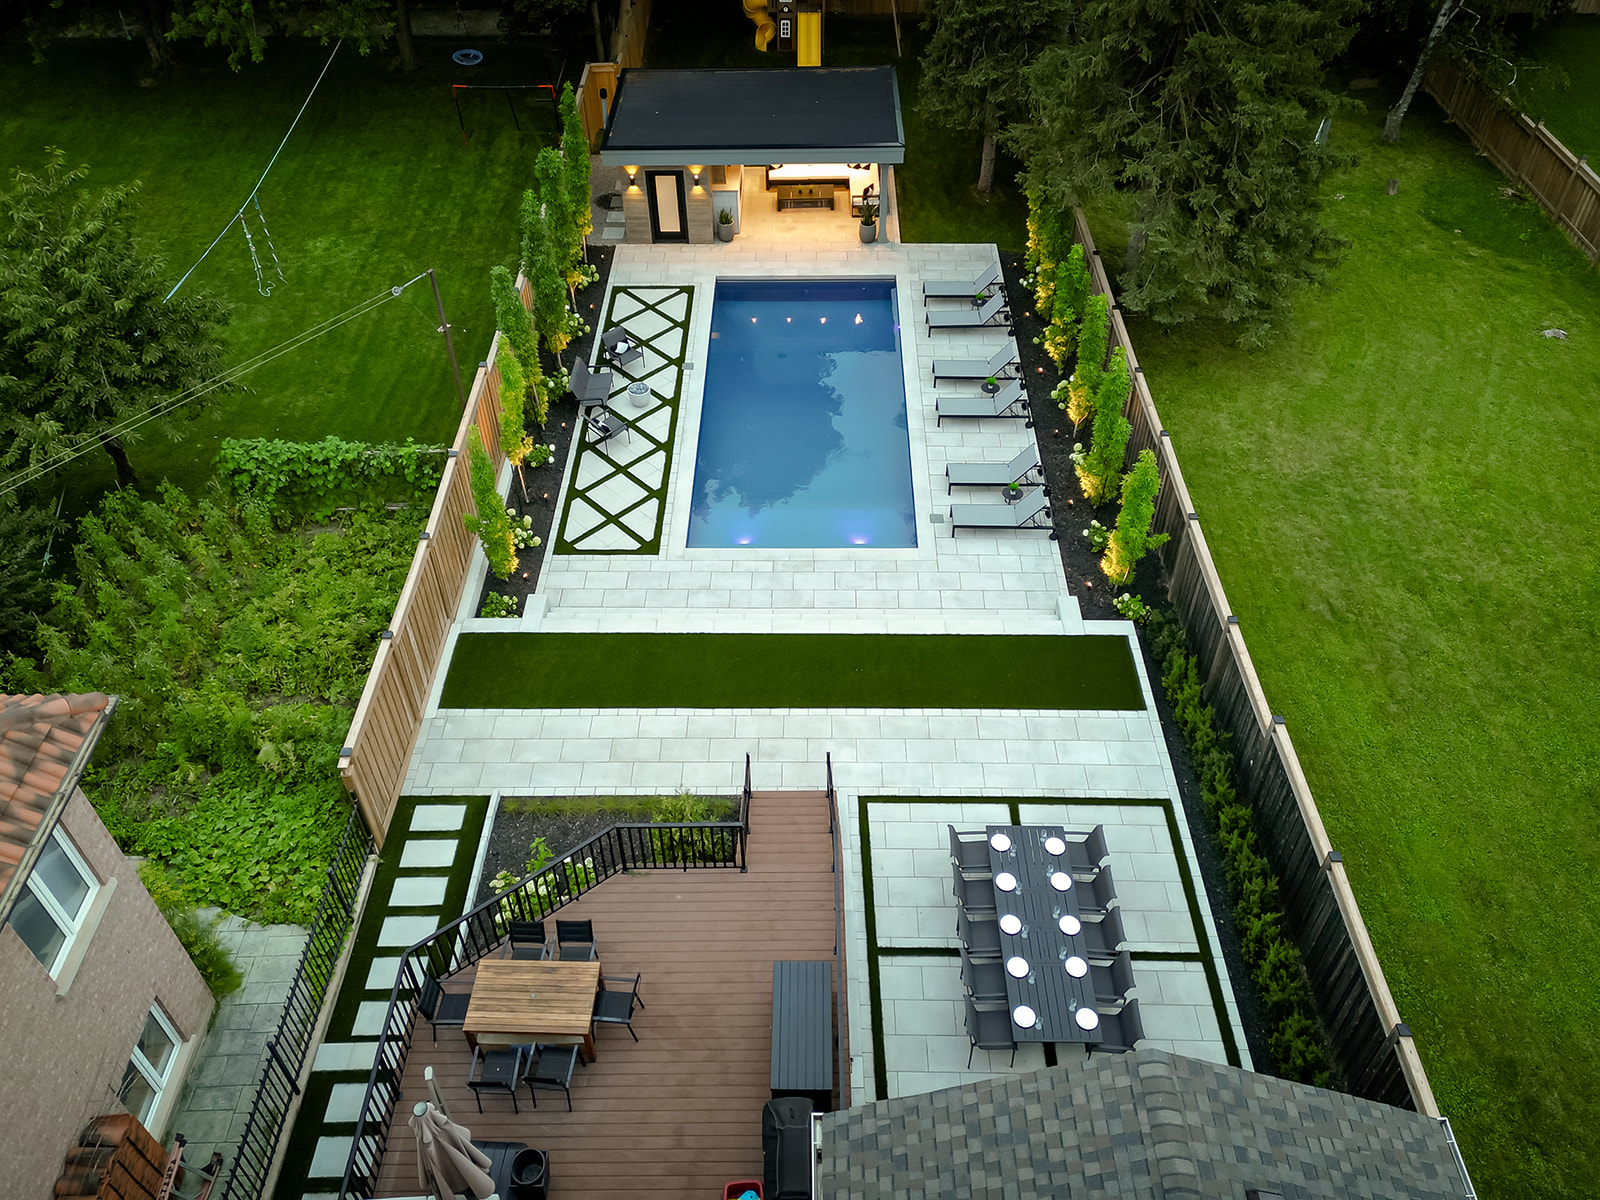 An inground pool with seating on either side, a pool house above and seating on the deck and on the patio stones.